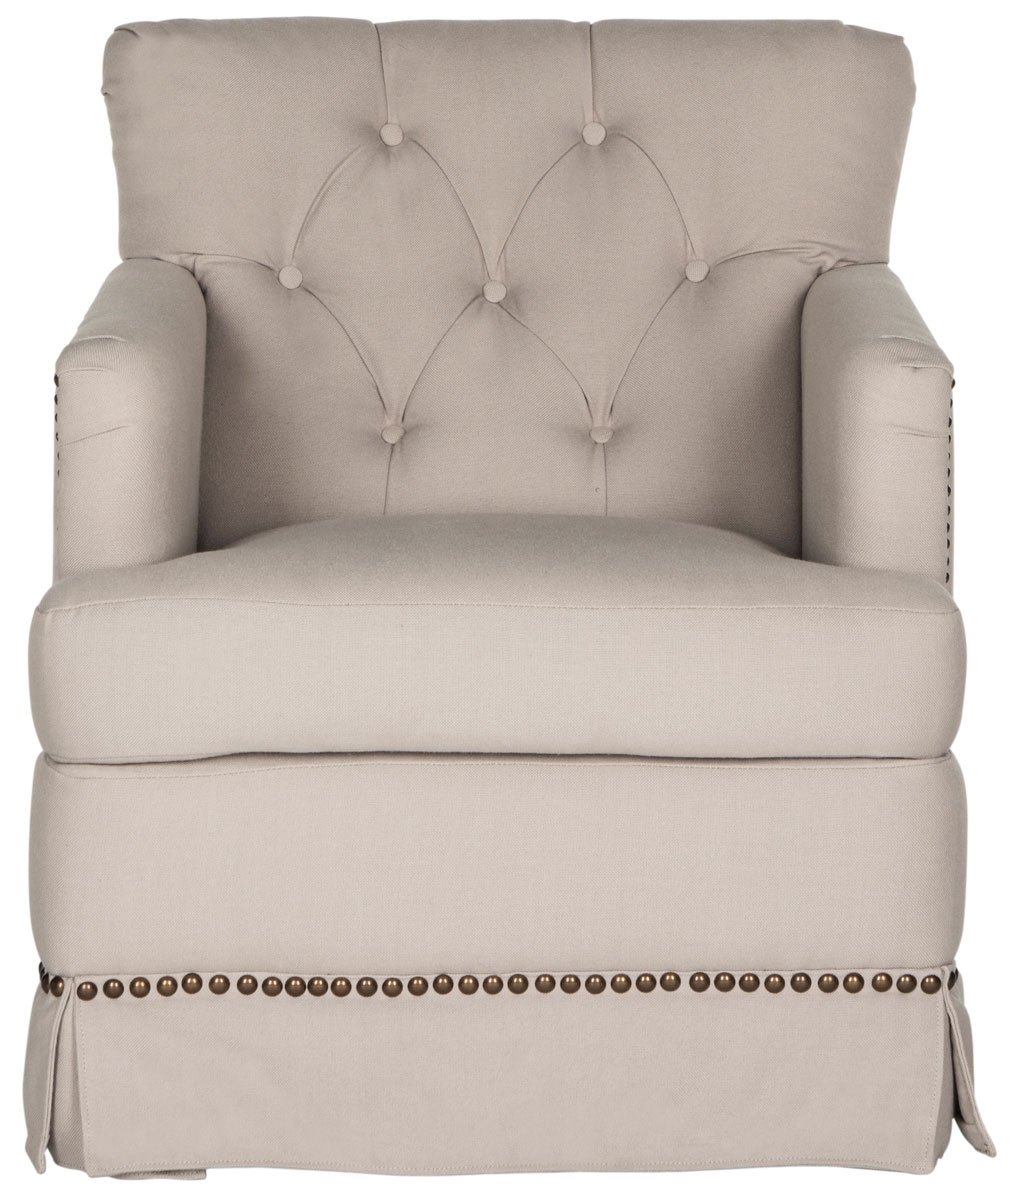 Millicent Swivel Accent Chair - Brass Nail Heads - Taupe - Arlo Home - Image 1